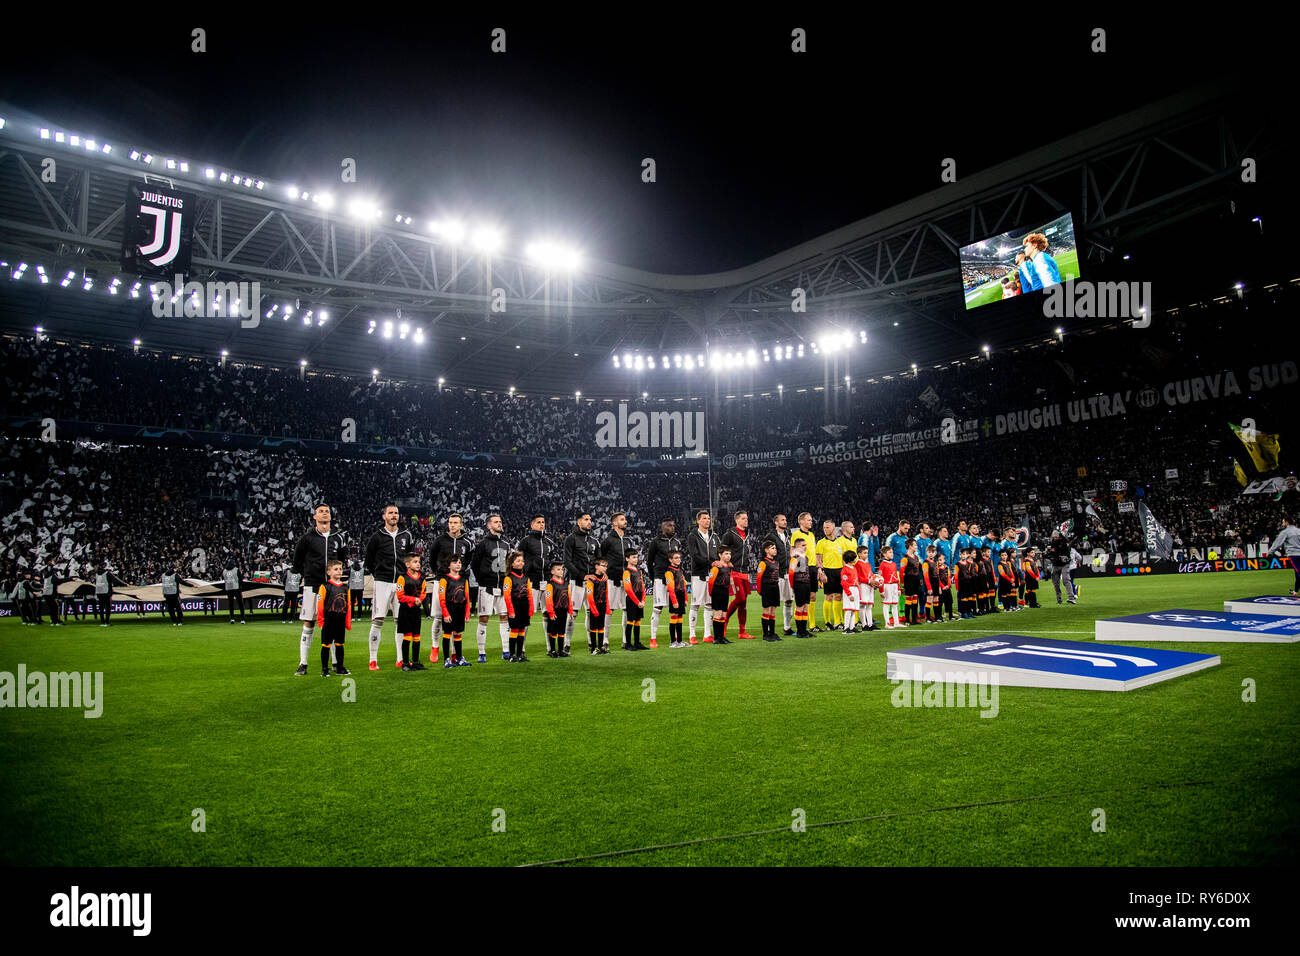 Juventus Vs Atletico Madrid High Resolution Stock Photography and Images -  Alamy